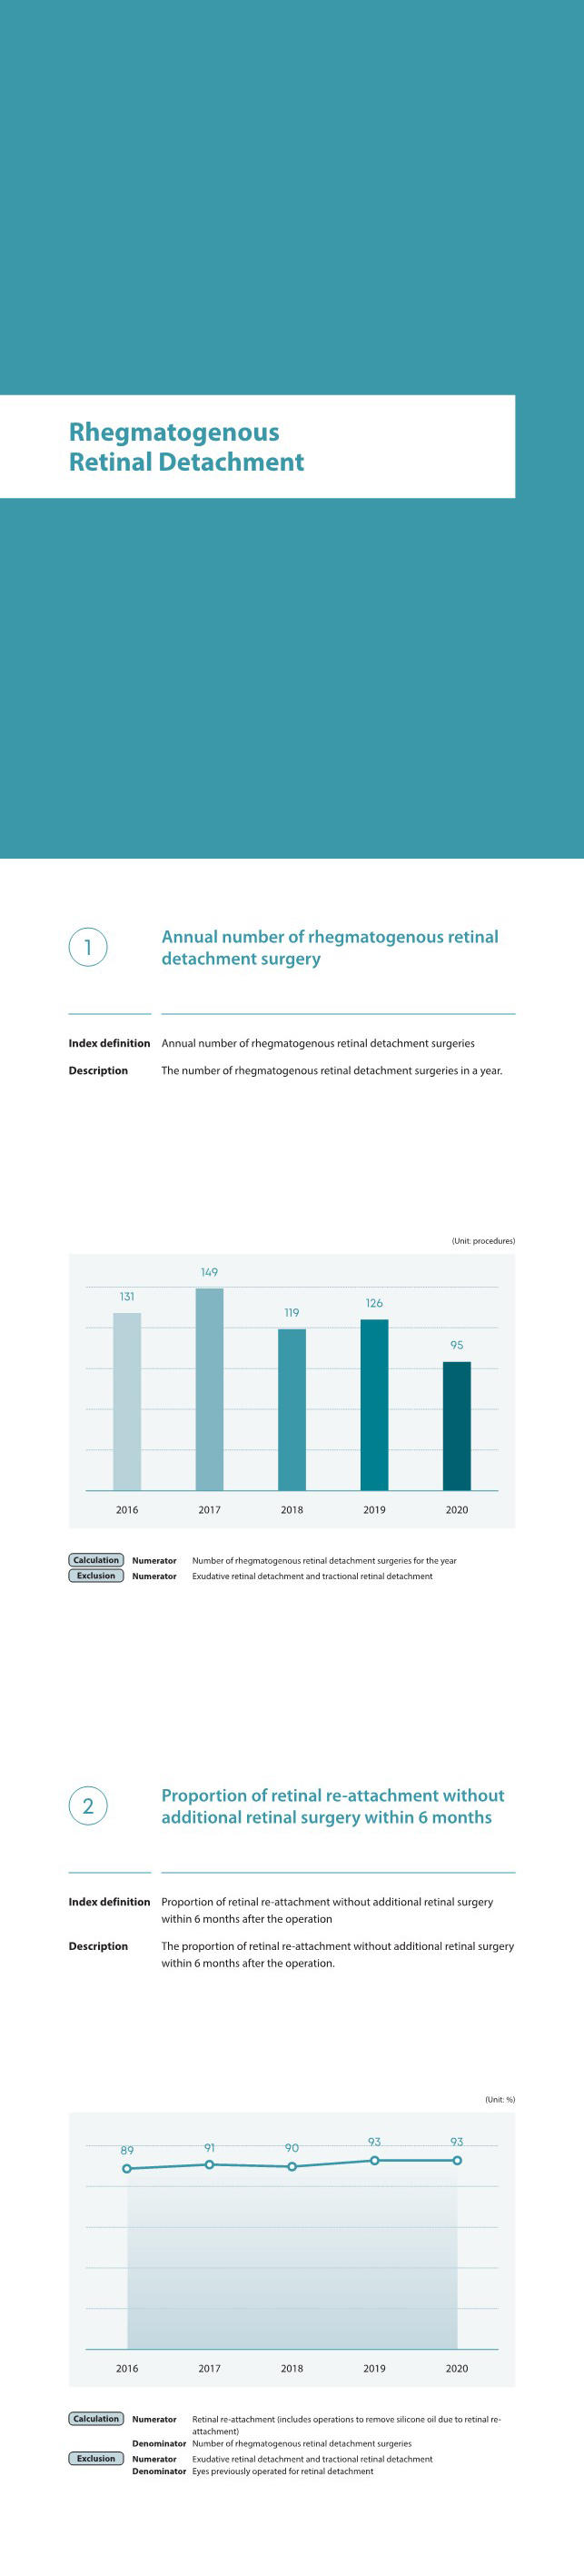 Rhegmatogenous Retinal Detachment, Annual number of rhegmatogenous retinal detachment surgeries, The number of rhegmatogenous retinal detachment surgeries in a year